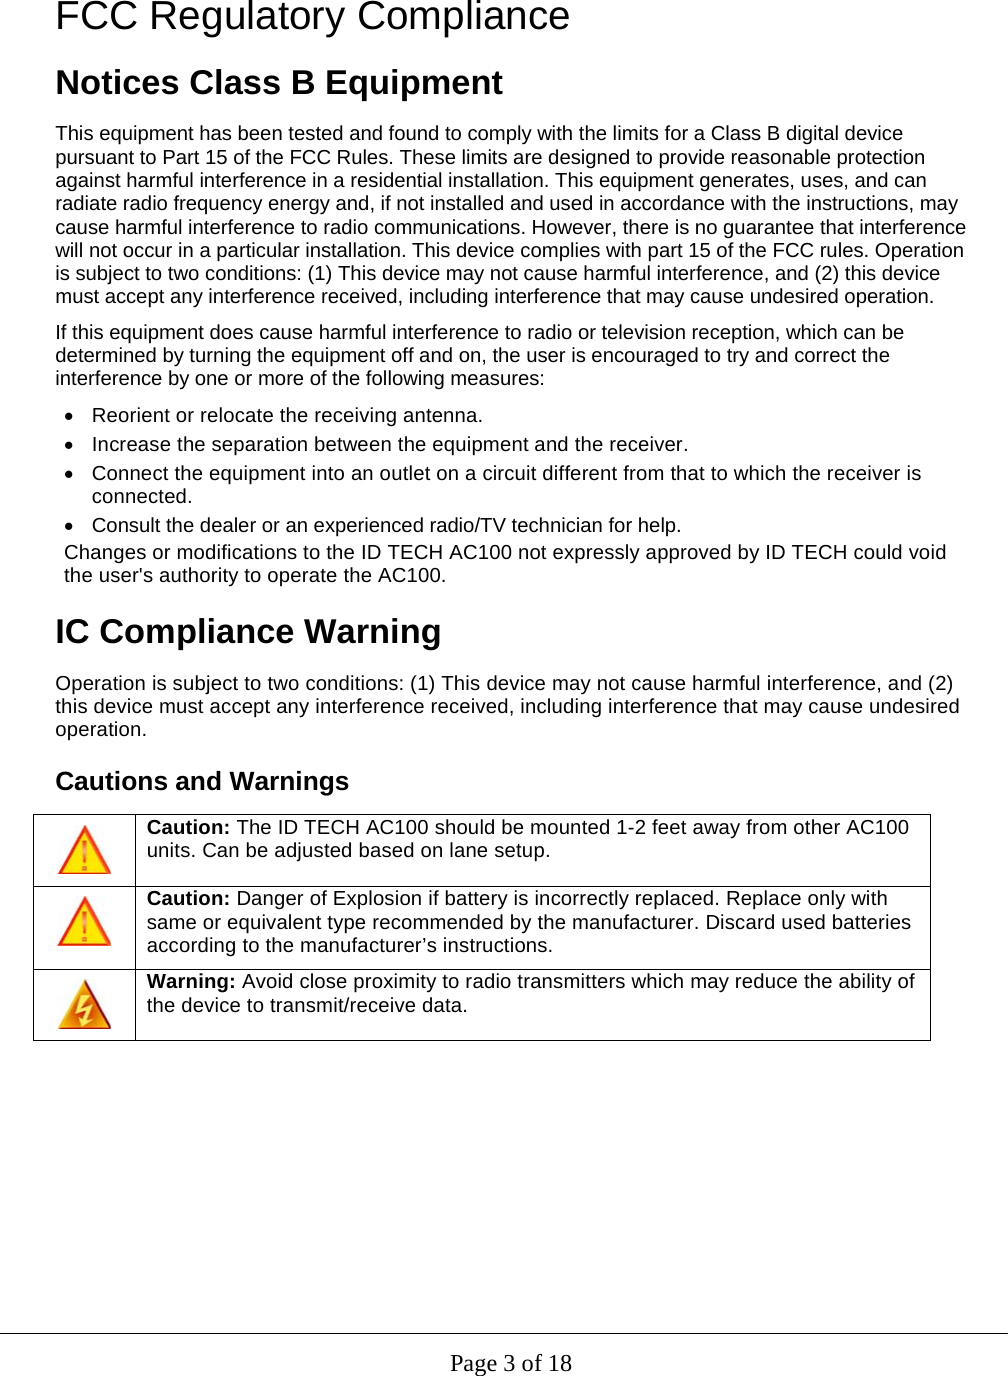  Page 3 of 18 FCC Regulatory Compliance Notices Class B Equipment This equipment has been tested and found to comply with the limits for a Class B digital device pursuant to Part 15 of the FCC Rules. These limits are designed to provide reasonable protection against harmful interference in a residential installation. This equipment generates, uses, and can radiate radio frequency energy and, if not installed and used in accordance with the instructions, may cause harmful interference to radio communications. However, there is no guarantee that interference will not occur in a particular installation. This device complies with part 15 of the FCC rules. Operation is subject to two conditions: (1) This device may not cause harmful interference, and (2) this device must accept any interference received, including interference that may cause undesired operation. If this equipment does cause harmful interference to radio or television reception, which can be determined by turning the equipment off and on, the user is encouraged to try and correct the interference by one or more of the following measures:   Reorient or relocate the receiving antenna.    Increase the separation between the equipment and the receiver.   Connect the equipment into an outlet on a circuit different from that to which the receiver is connected.    Consult the dealer or an experienced radio/TV technician for help.  Changes or modifications to the ID TECH AC100 not expressly approved by ID TECH could void the user&apos;s authority to operate the AC100. IC Compliance Warning Operation is subject to two conditions: (1) This device may not cause harmful interference, and (2) this device must accept any interference received, including interference that may cause undesired operation. Cautions and Warnings  Caution: The ID TECH AC100 should be mounted 1-2 feet away from other AC100 units. Can be adjusted based on lane setup.  Caution: Danger of Explosion if battery is incorrectly replaced. Replace only with same or equivalent type recommended by the manufacturer. Discard used batteries according to the manufacturer’s instructions.  Warning: Avoid close proximity to radio transmitters which may reduce the ability of the device to transmit/receive data.   